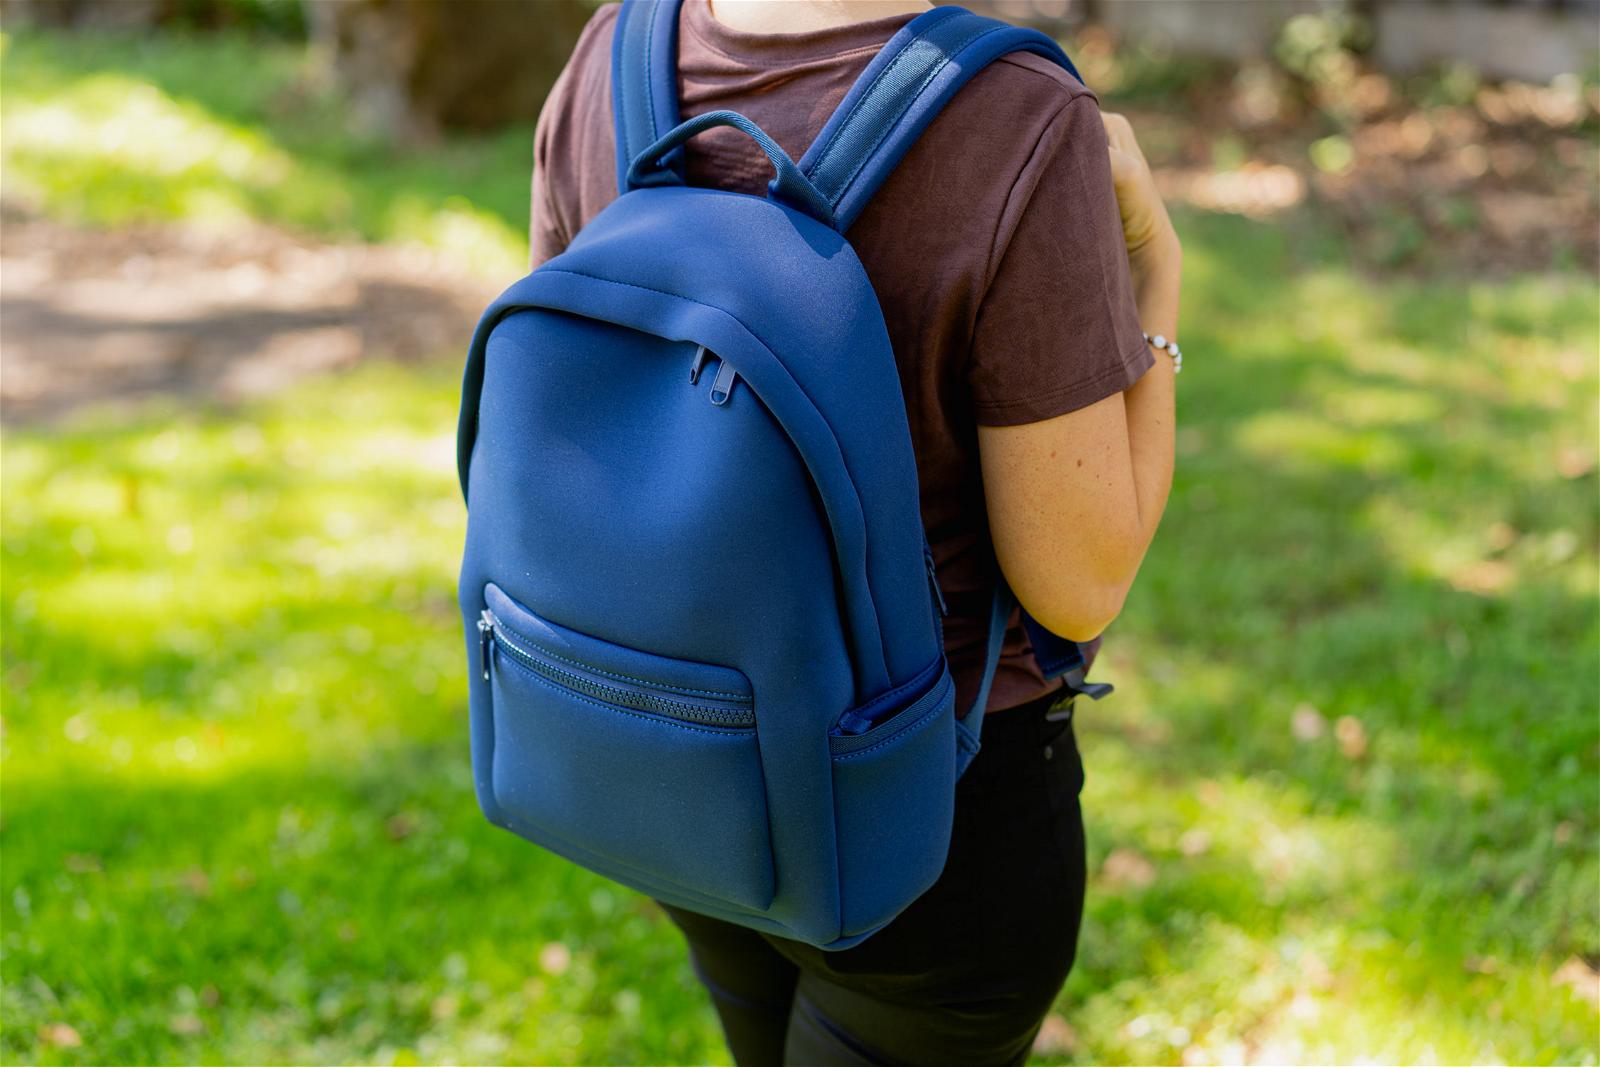 Quince All-Day Neoprene Backpack Review (See What I Liked)